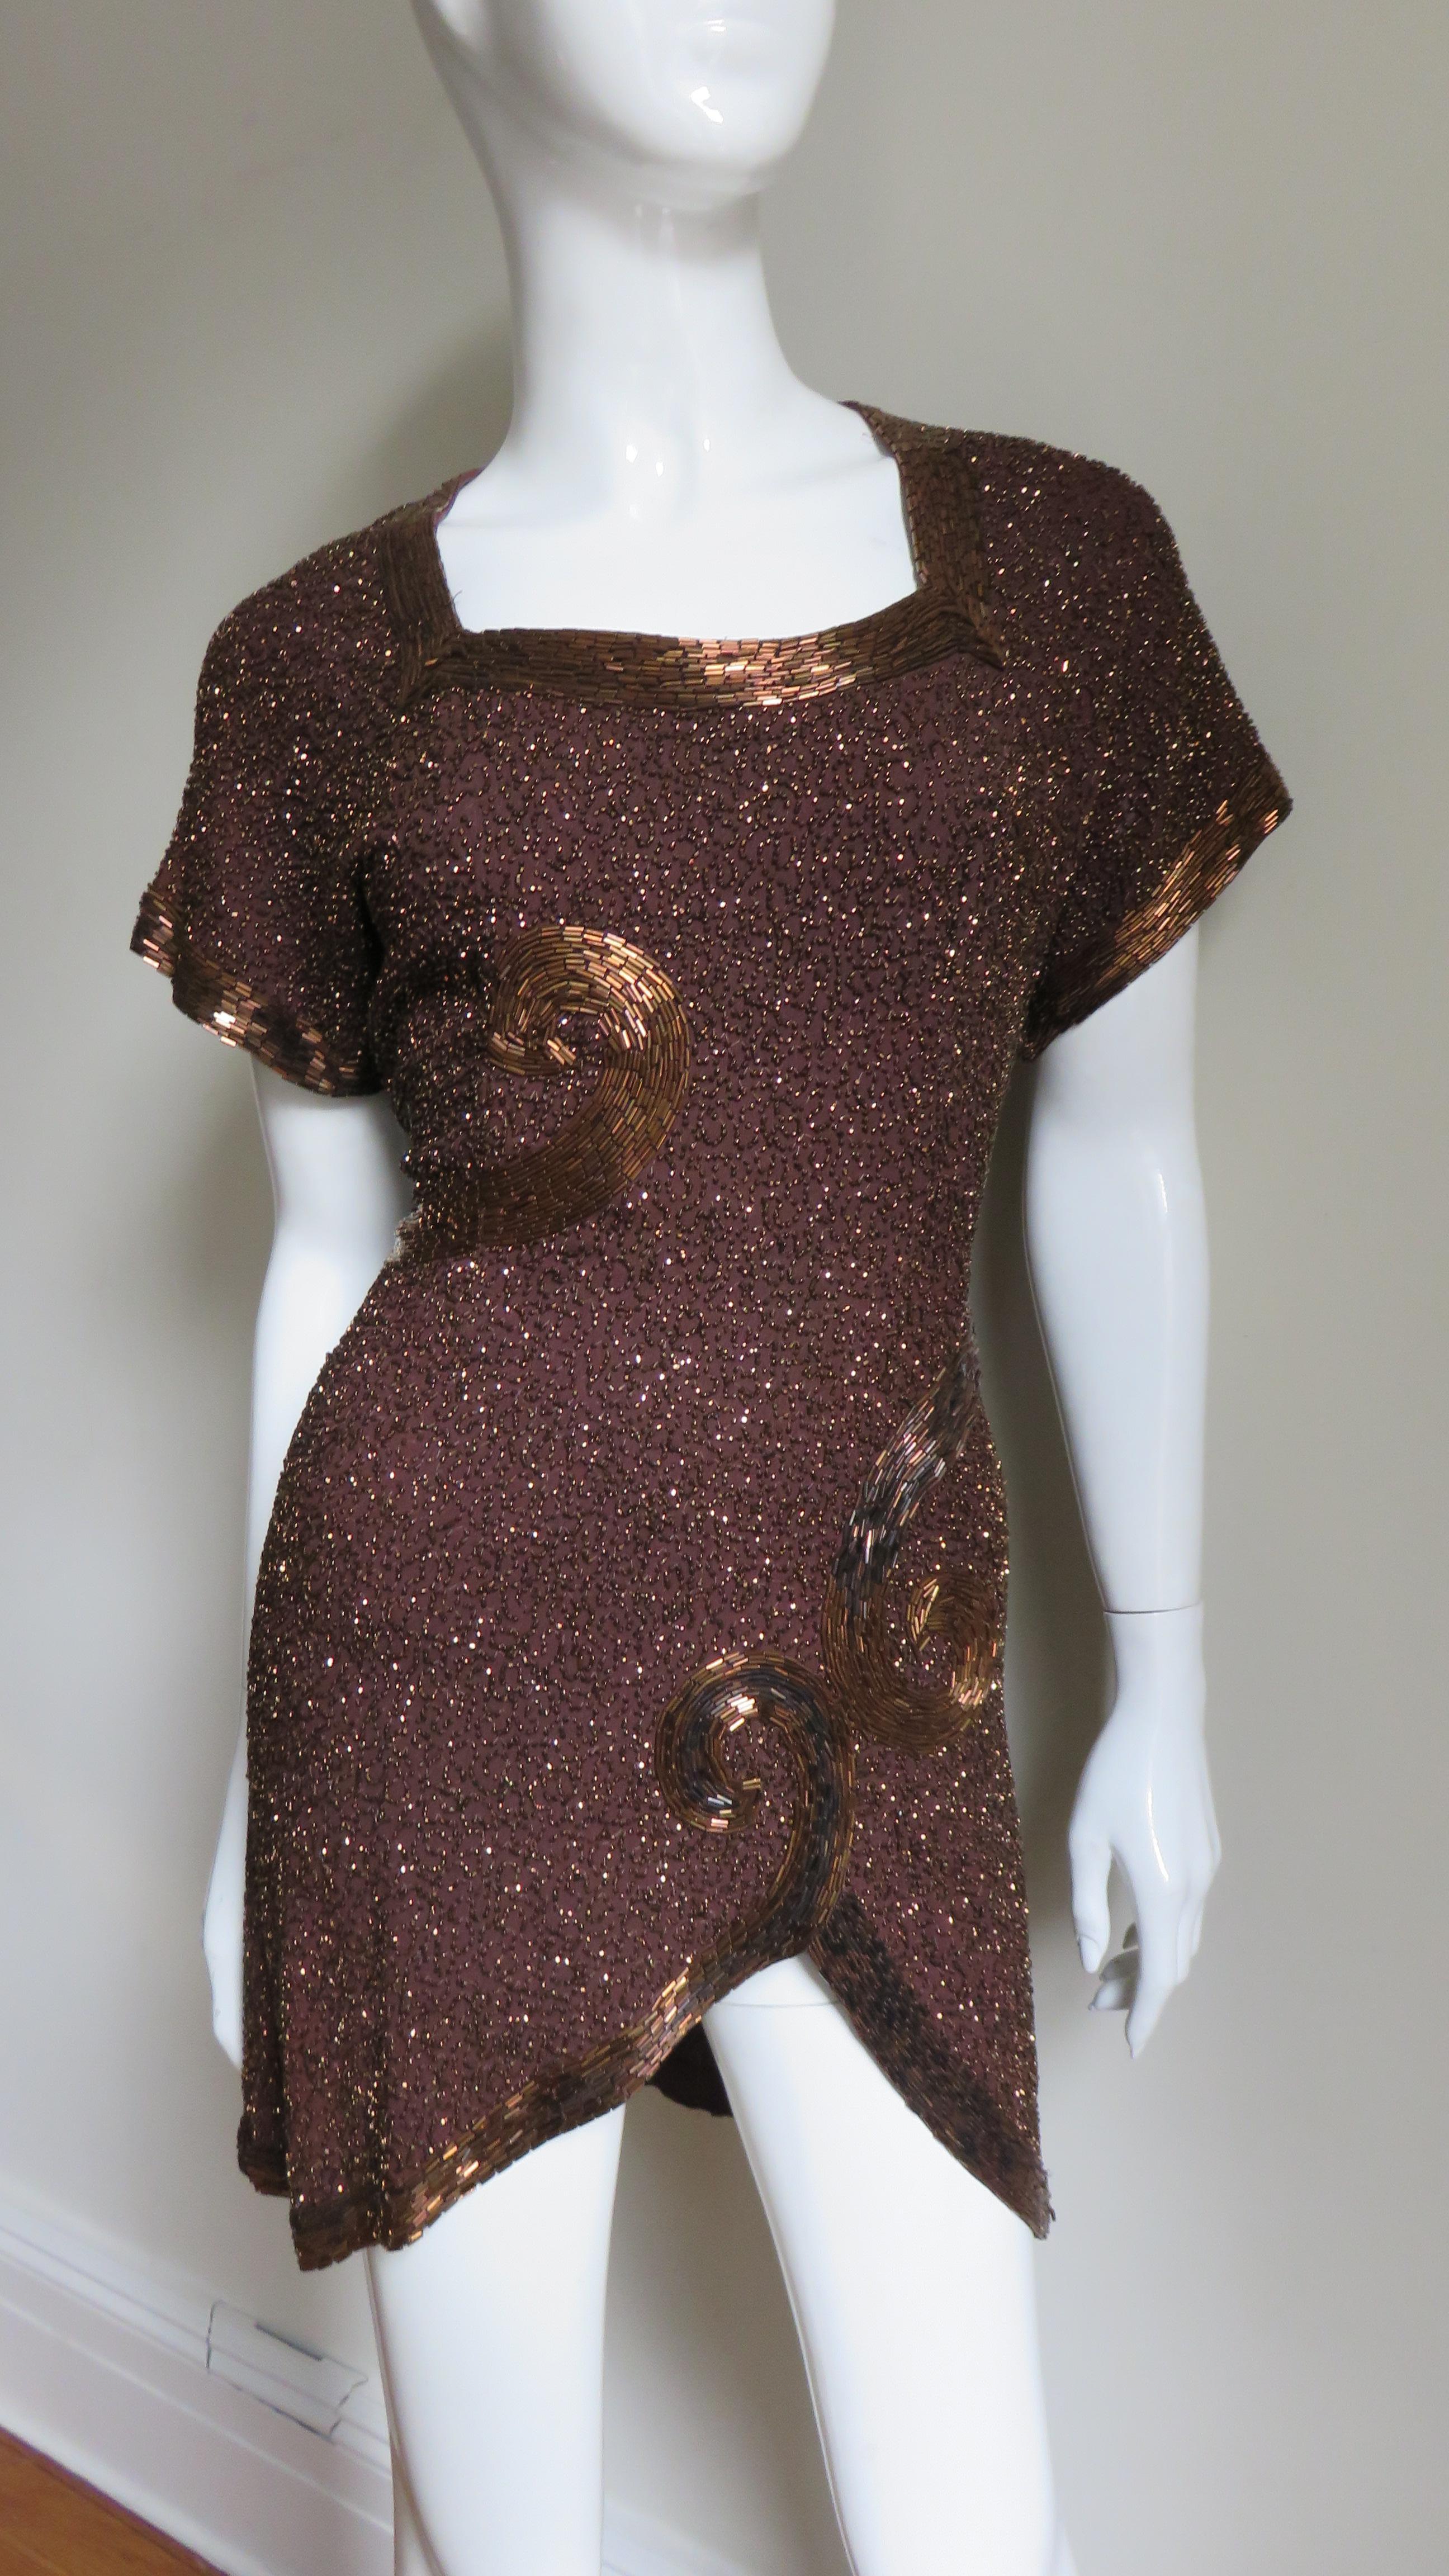 An incredible brown silk top tunic from Wilma New York. It has short dolman sleeves, a square neck and an asymmetric hemline. The sleeves, neckline and hemline have rows of artfully placed matching brown glass tubular beads with a scroll design